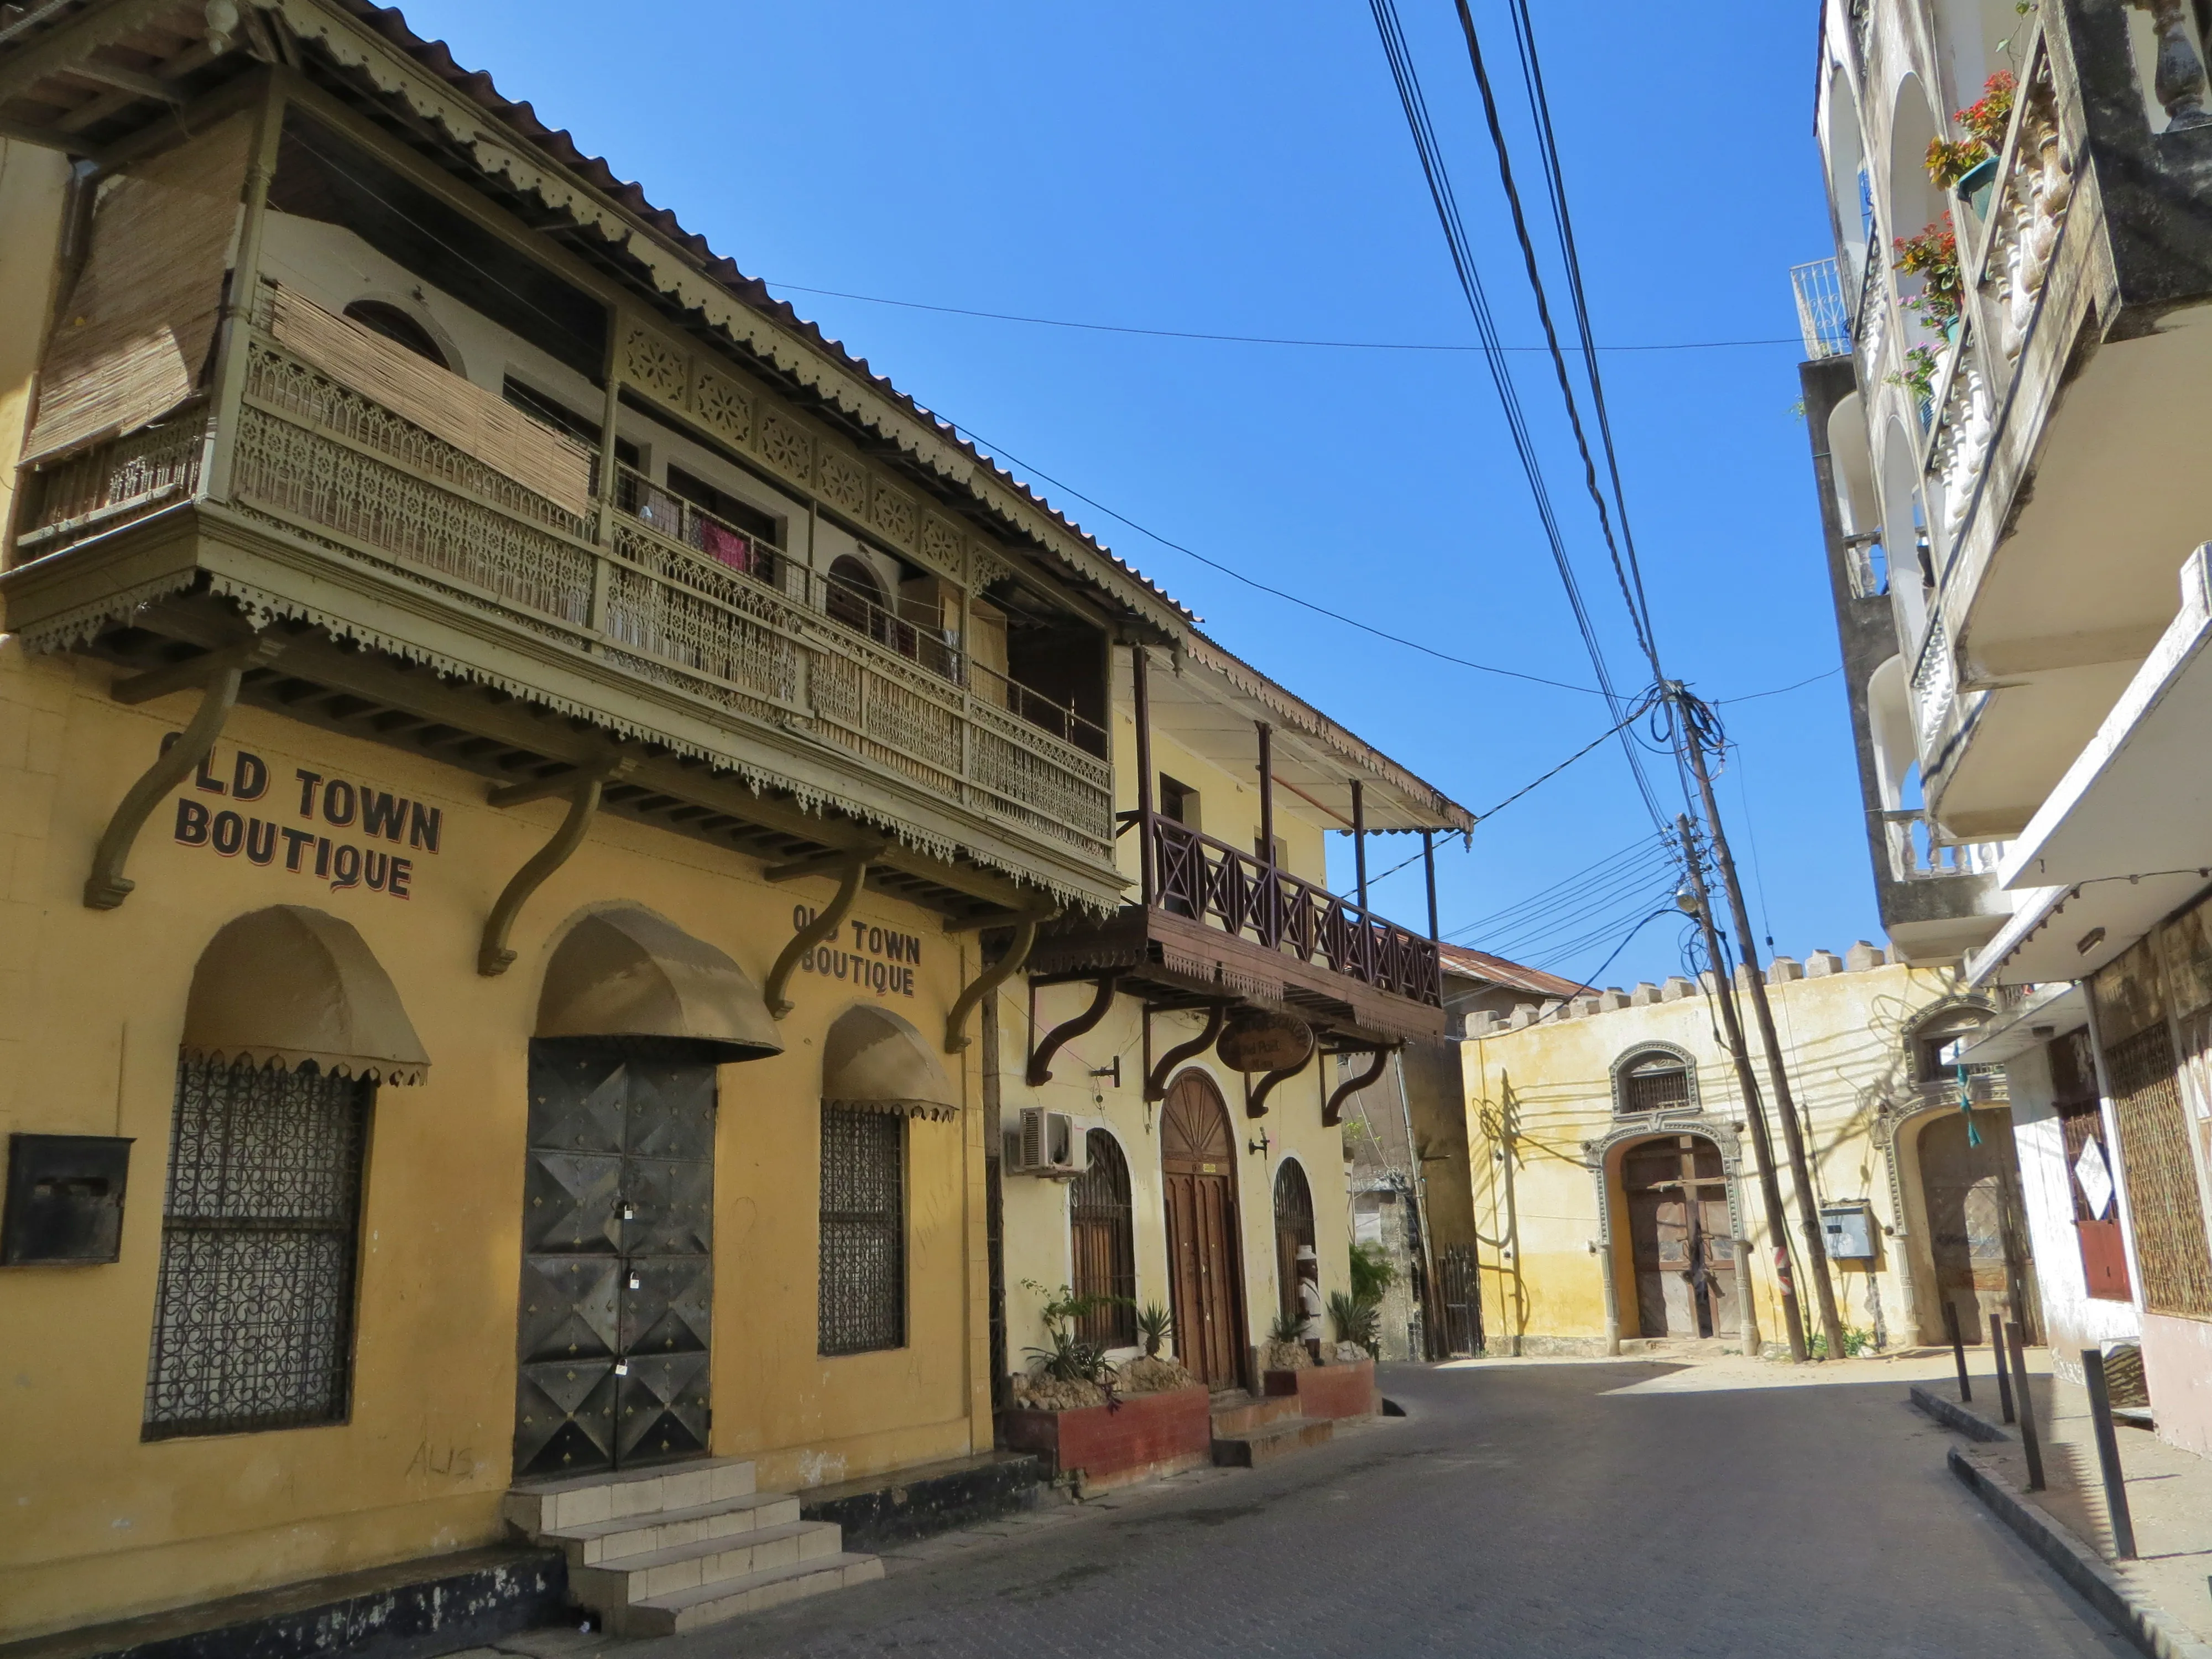 Mombasa Old Town in Kenya, Africa | Architecture - Rated 3.2